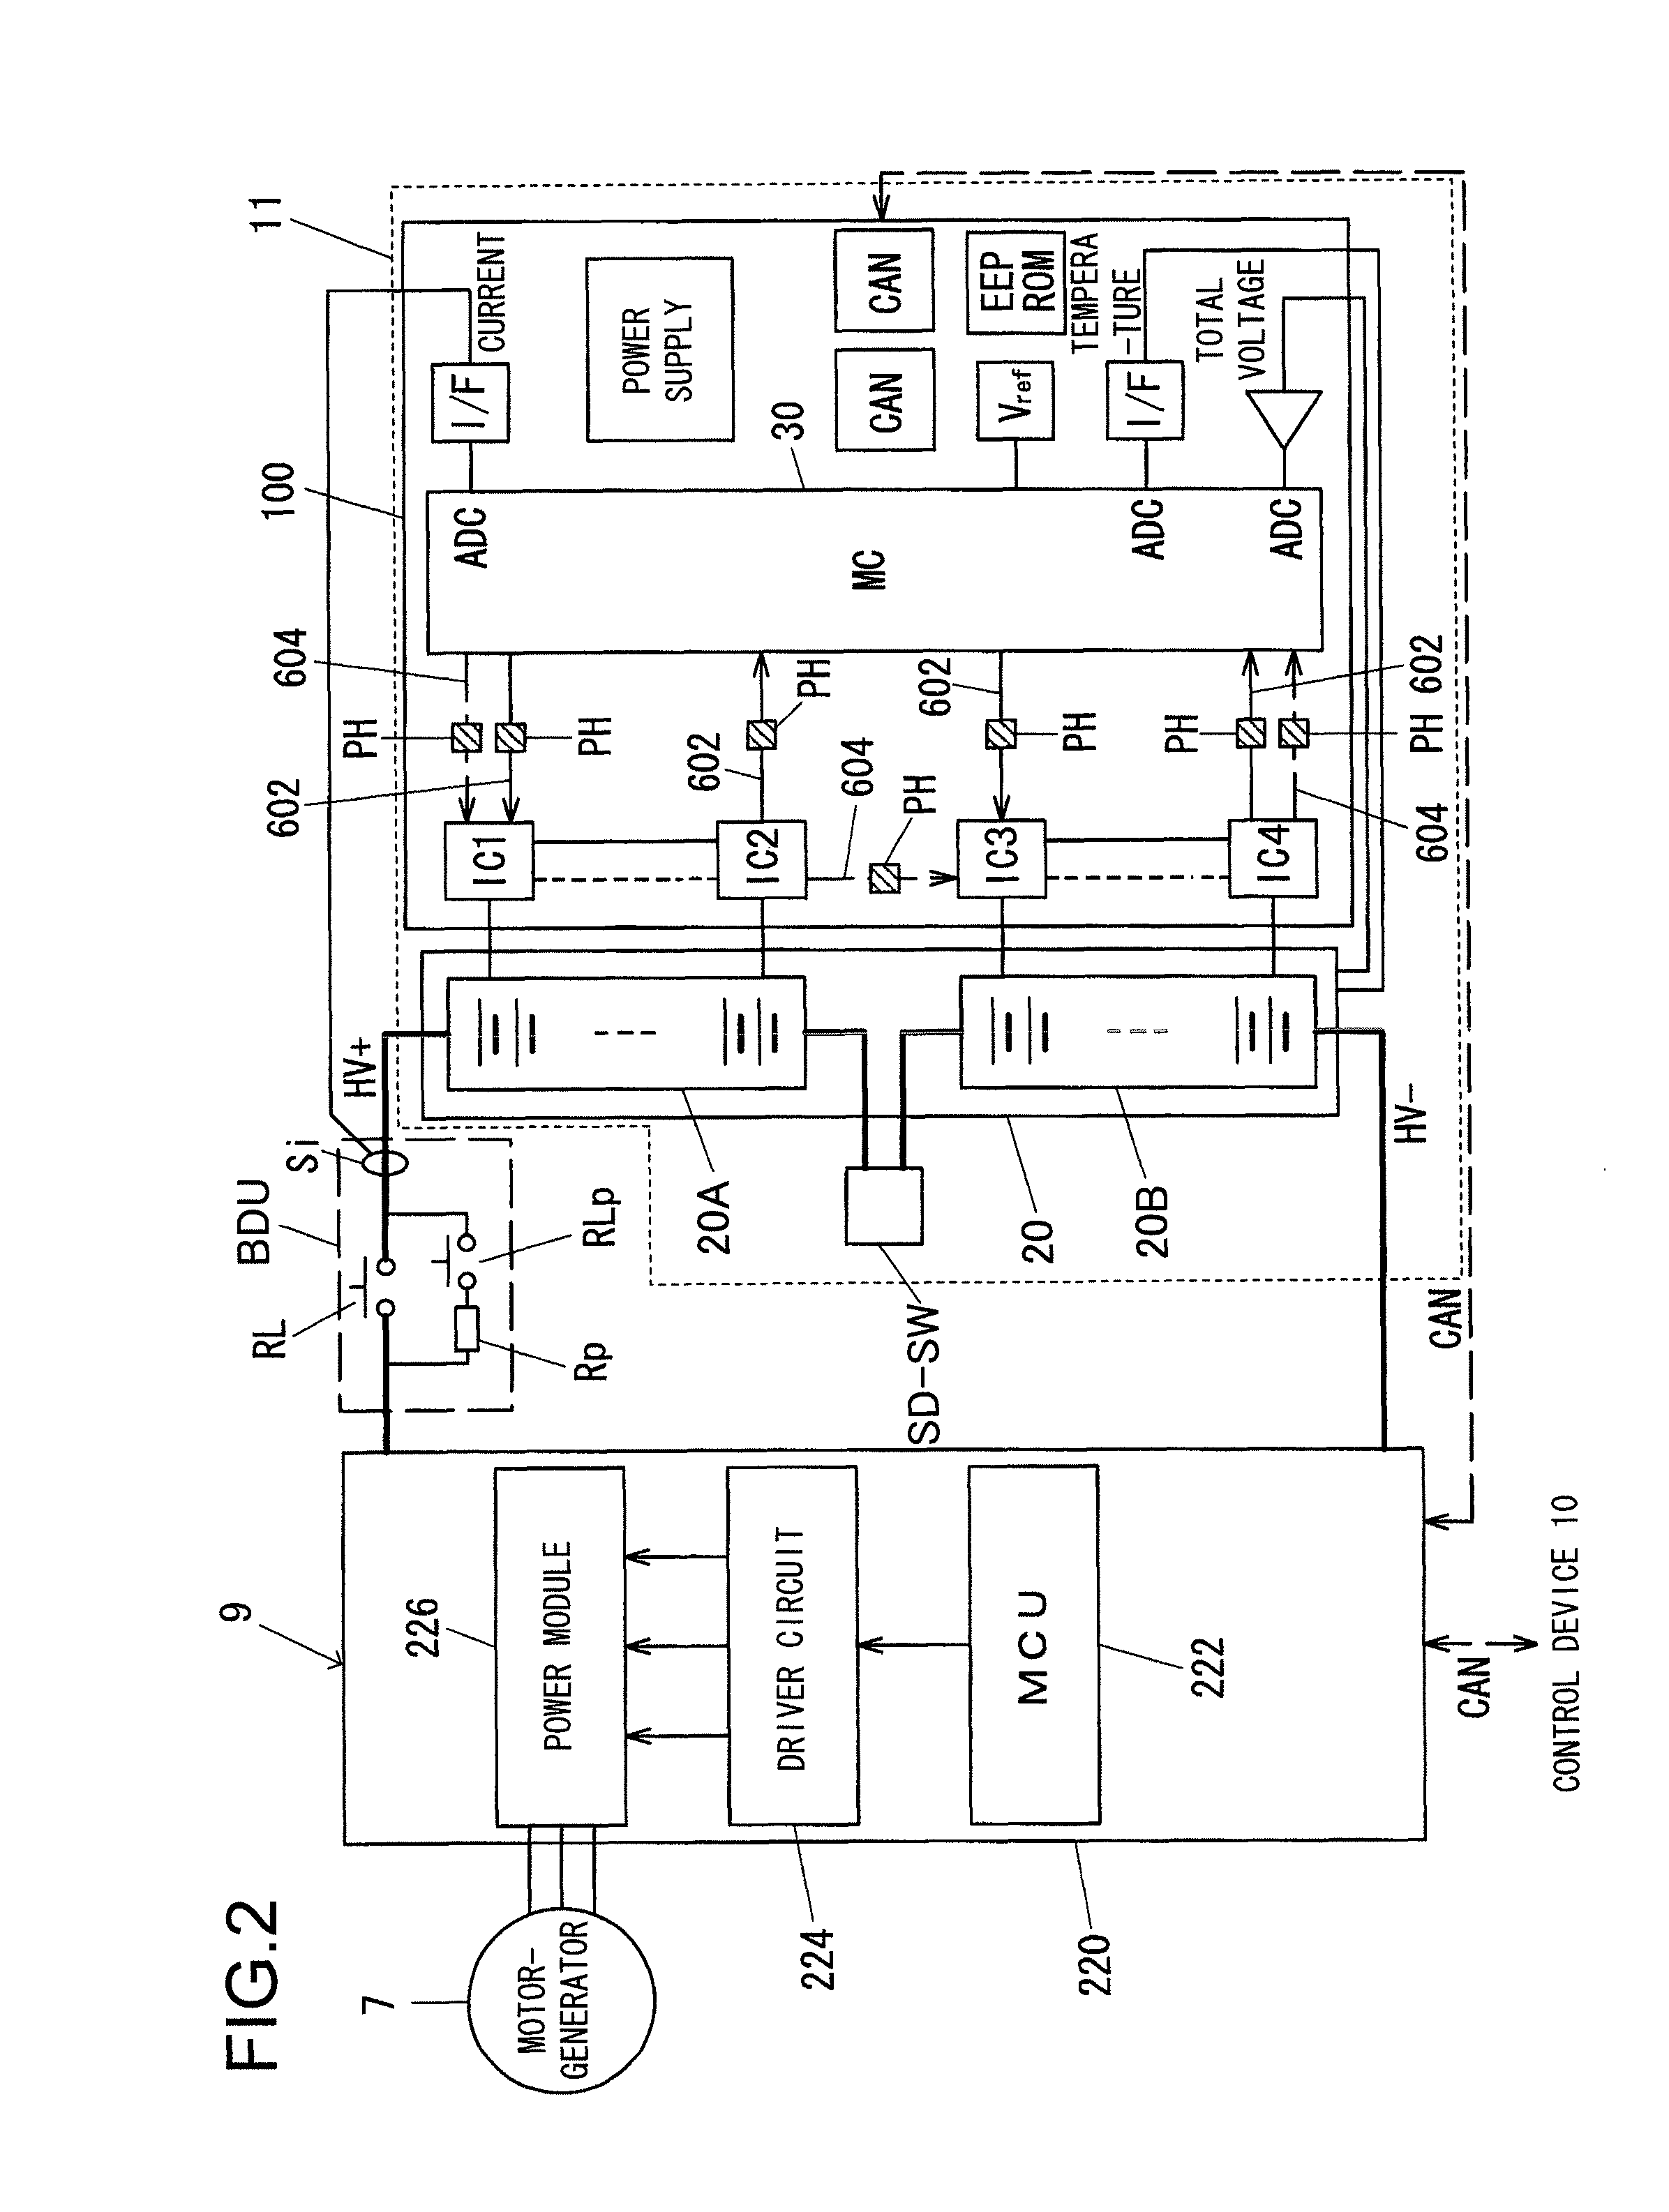 Cell control device and electricity storage device incorporating the same